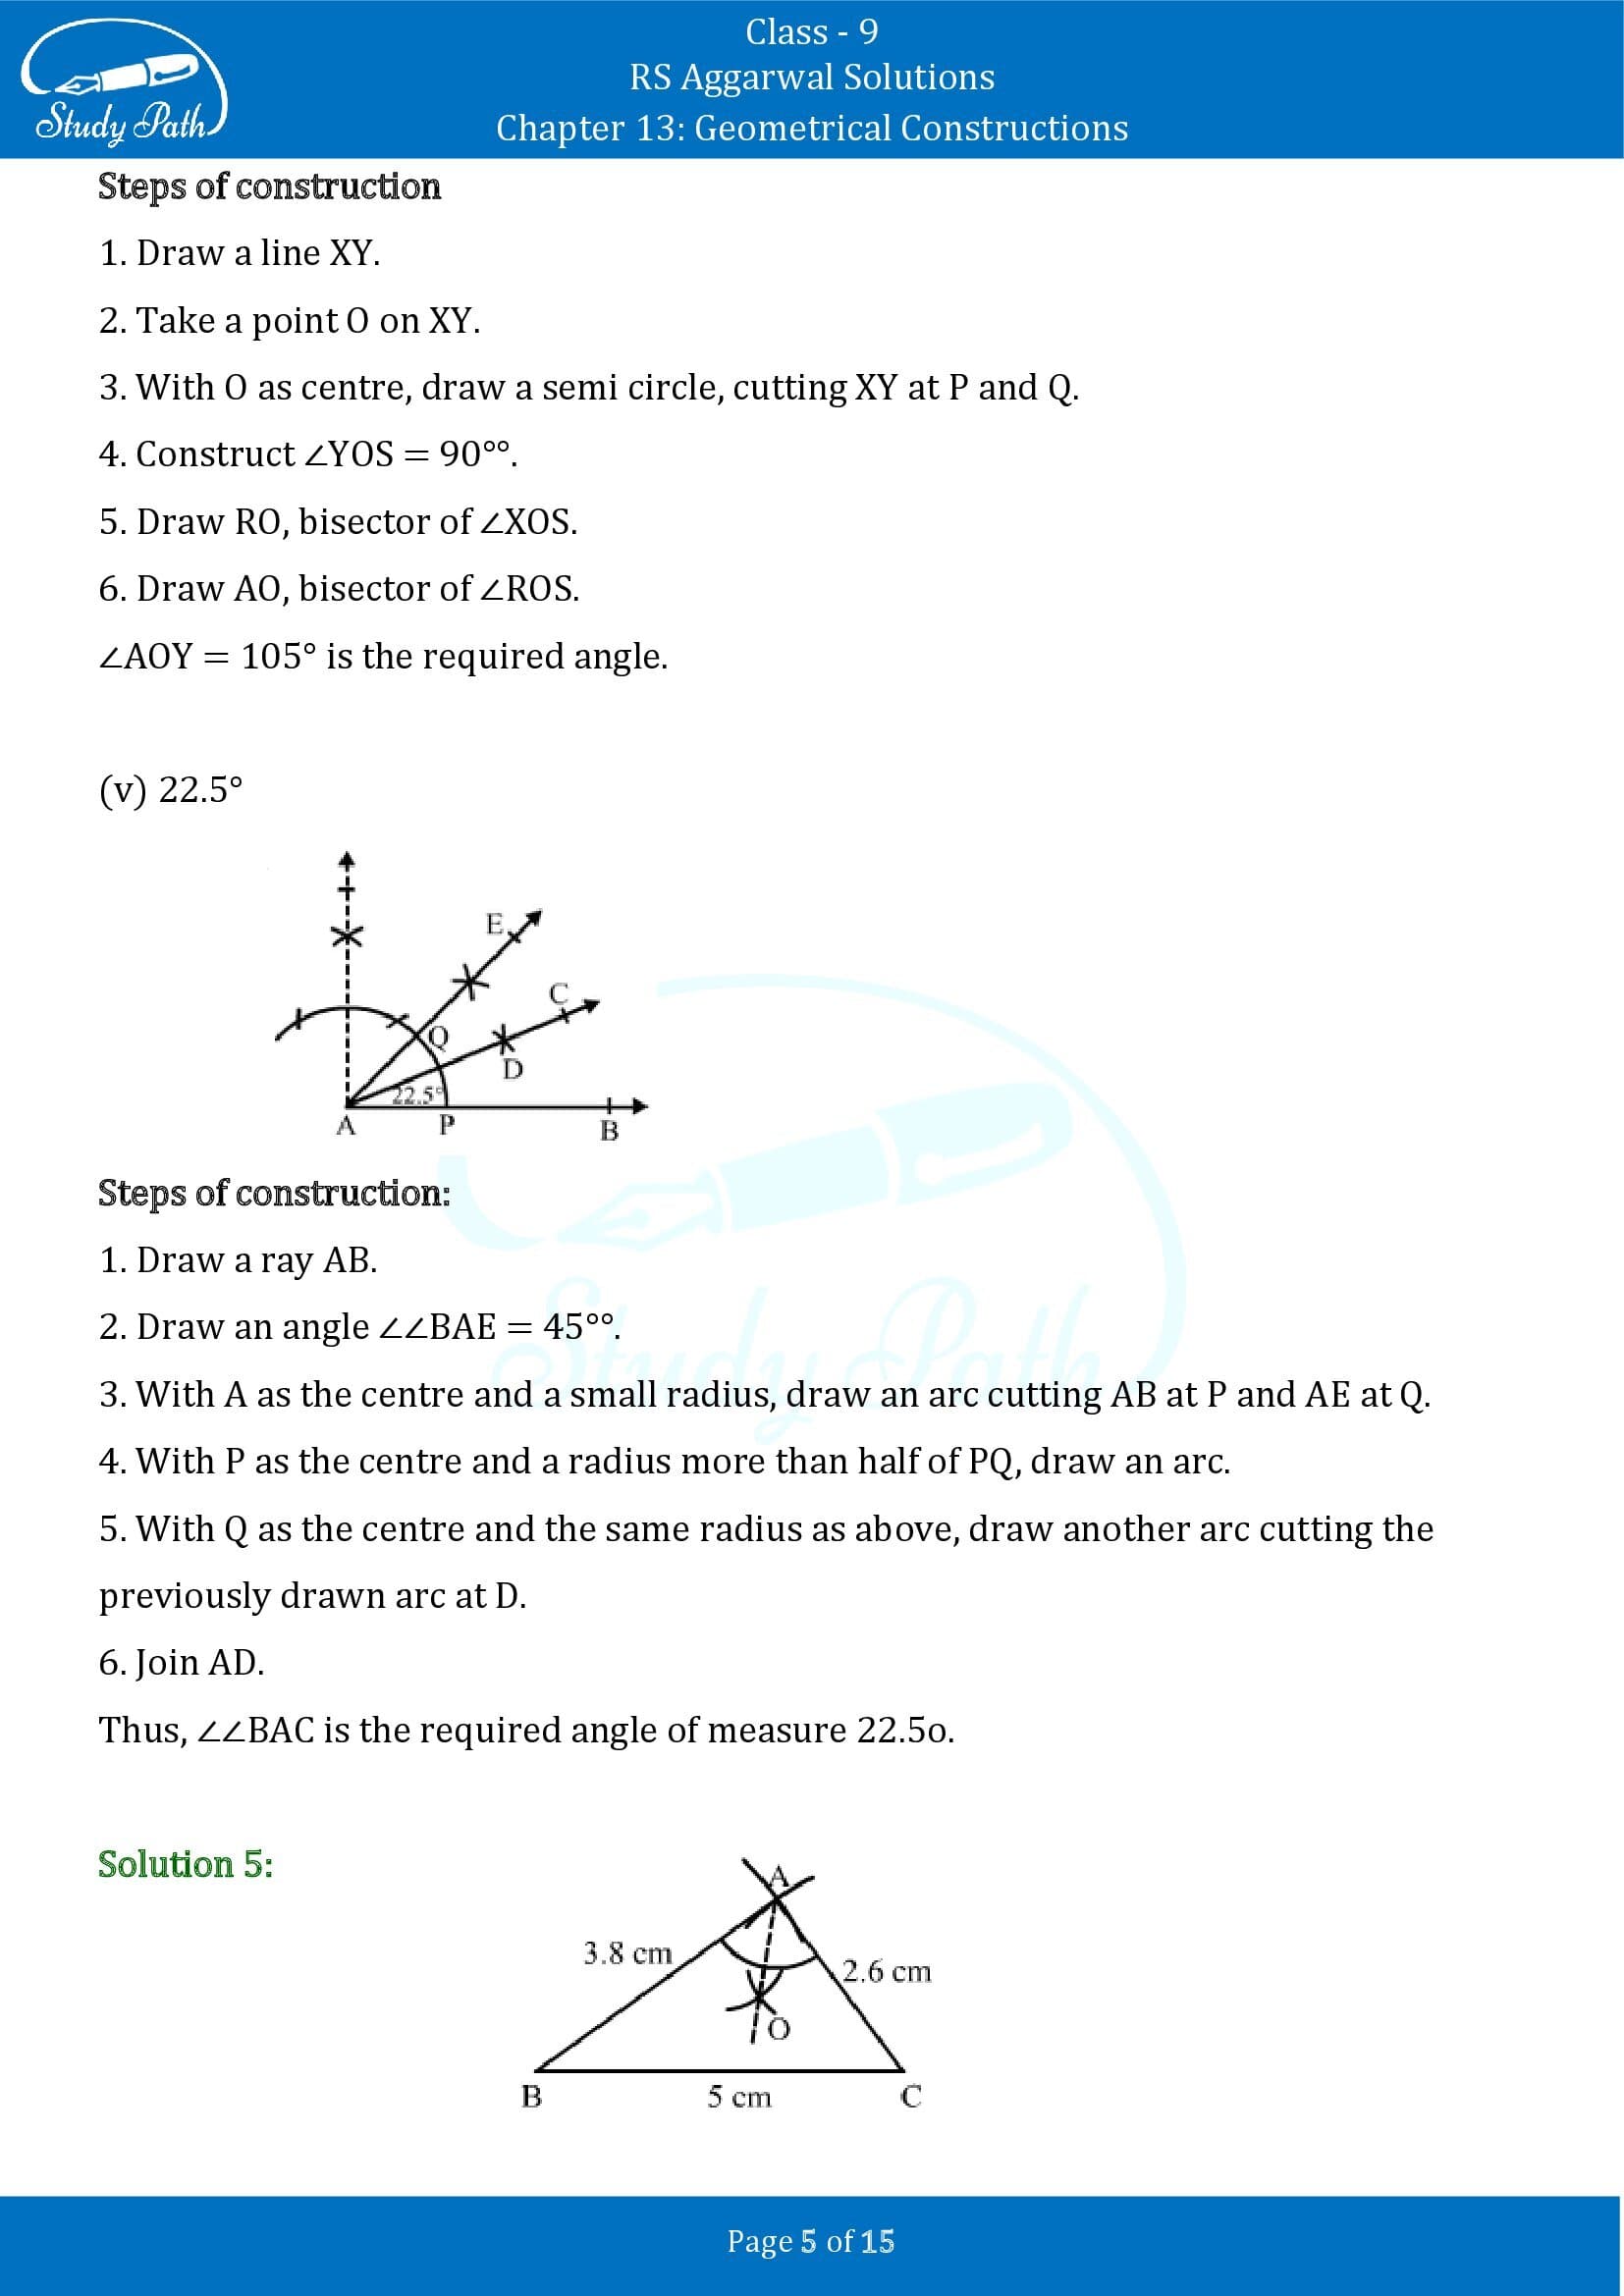 RS Aggarwal Solutions Class 9 Chapter 13 Geometrical Constructions 05